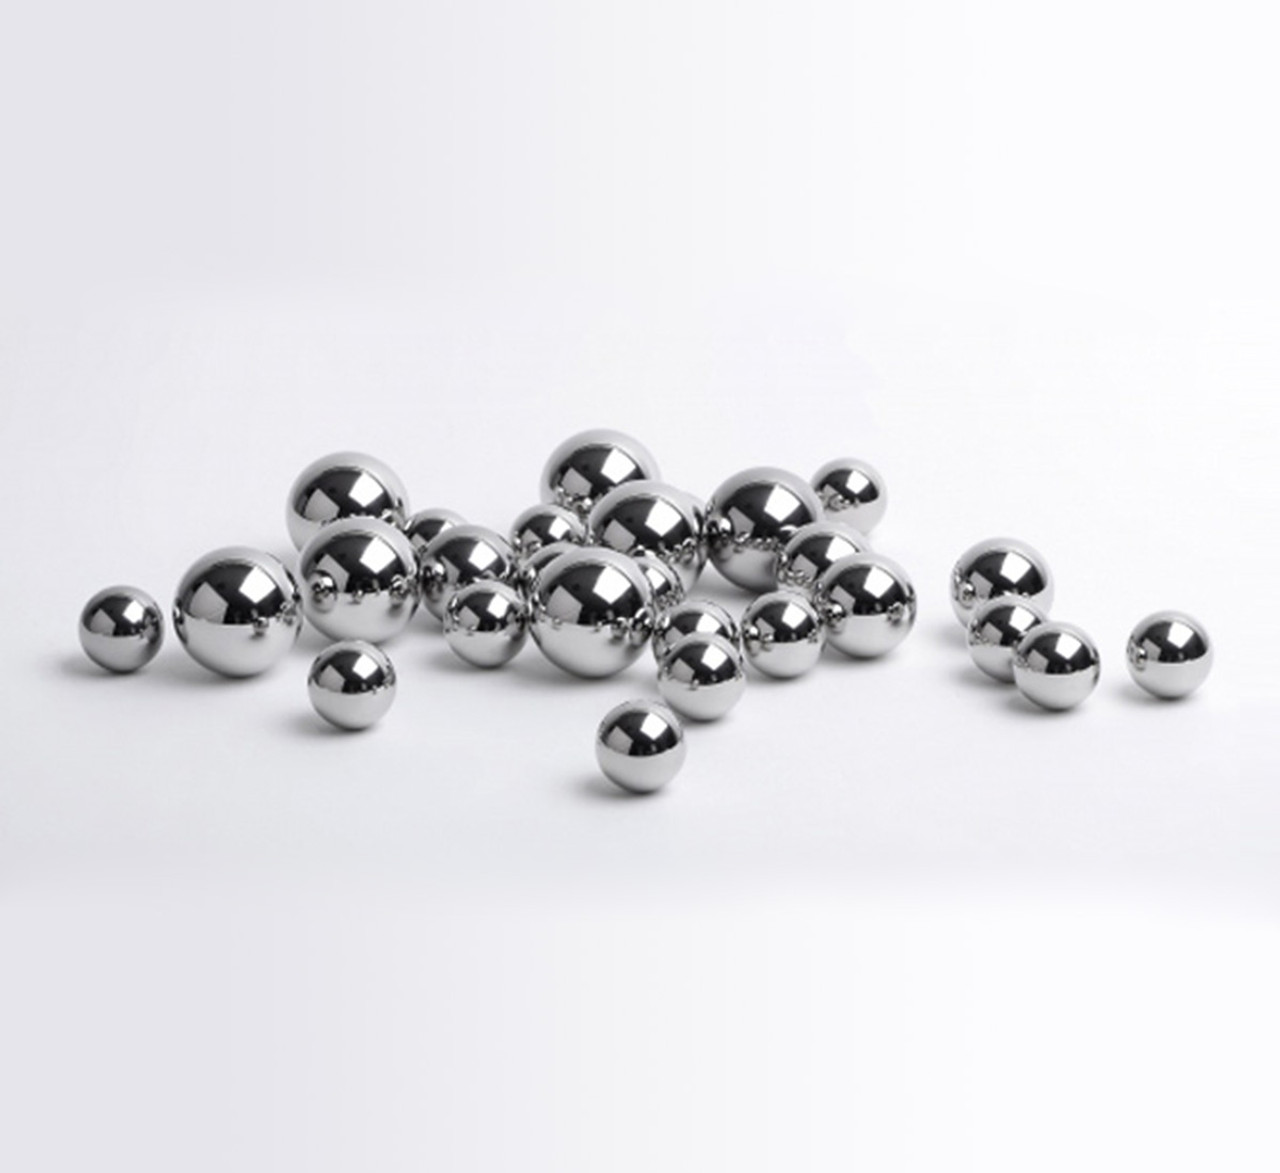 Rolling elements Ball 17.462 mm INOX AISI 420 - 1